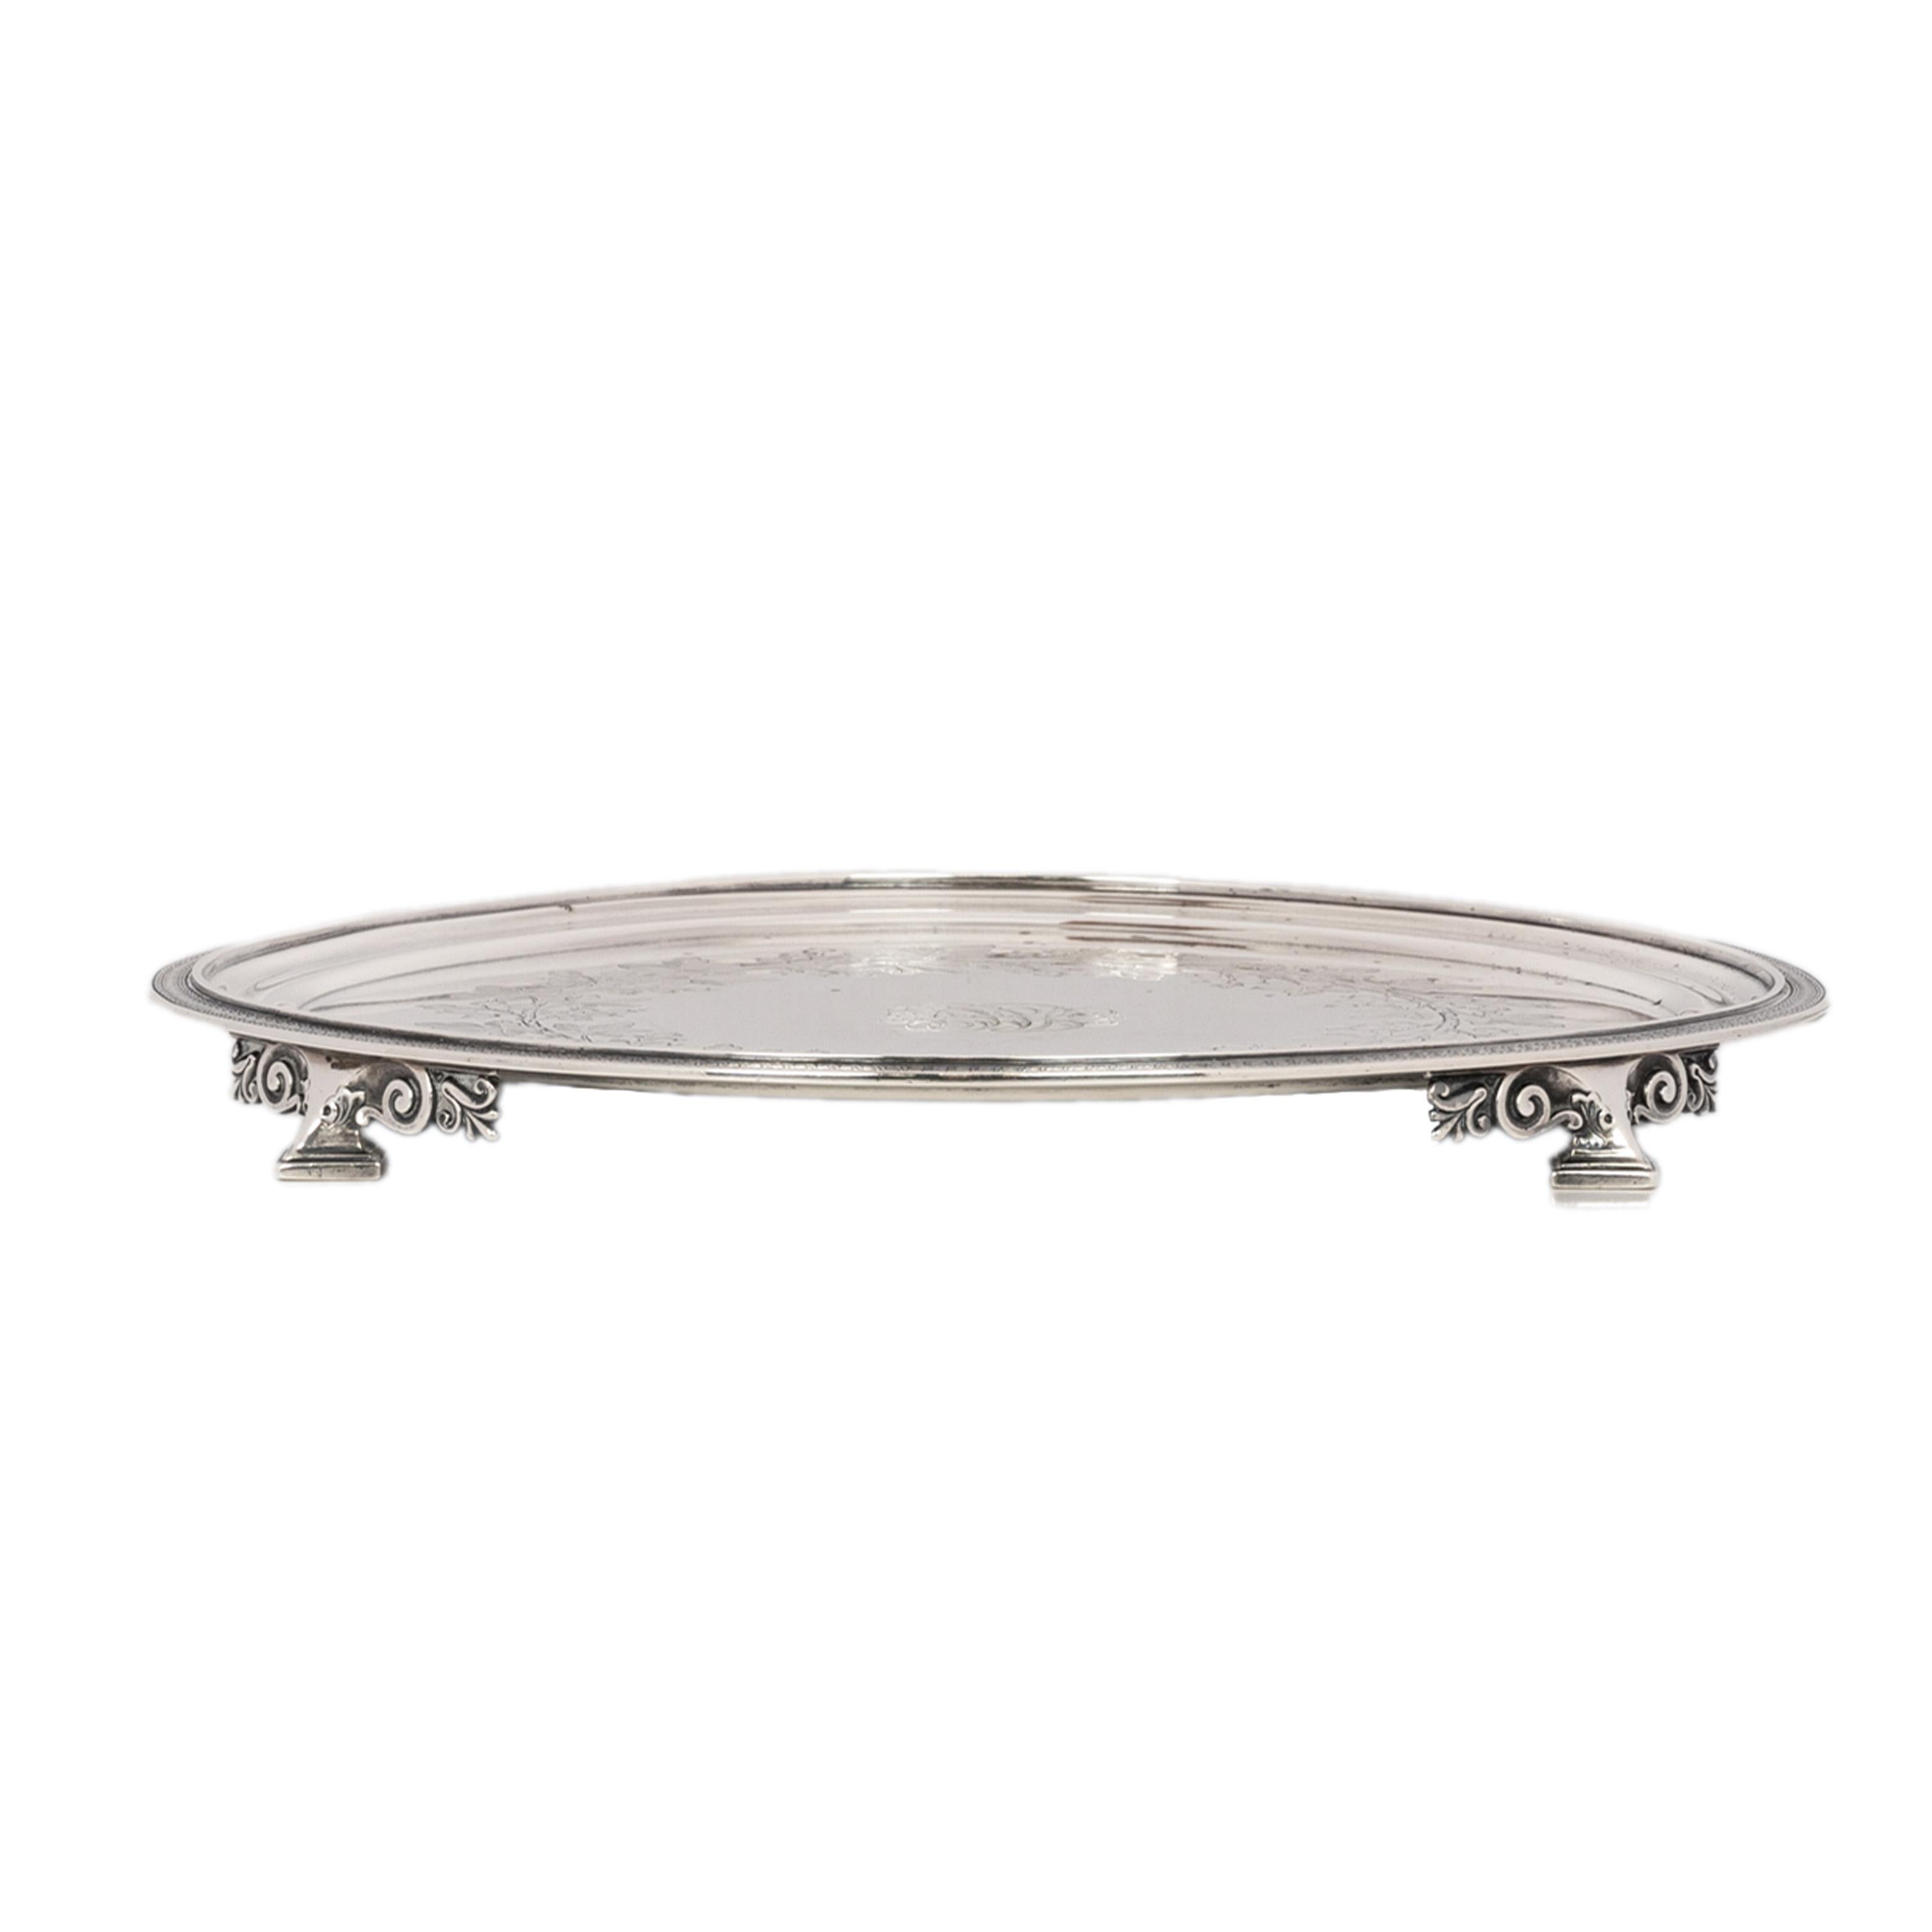 Antique Engraved Sterling Silver Tiffany & Co Footed Salver Tray New York 1870 For Sale 1